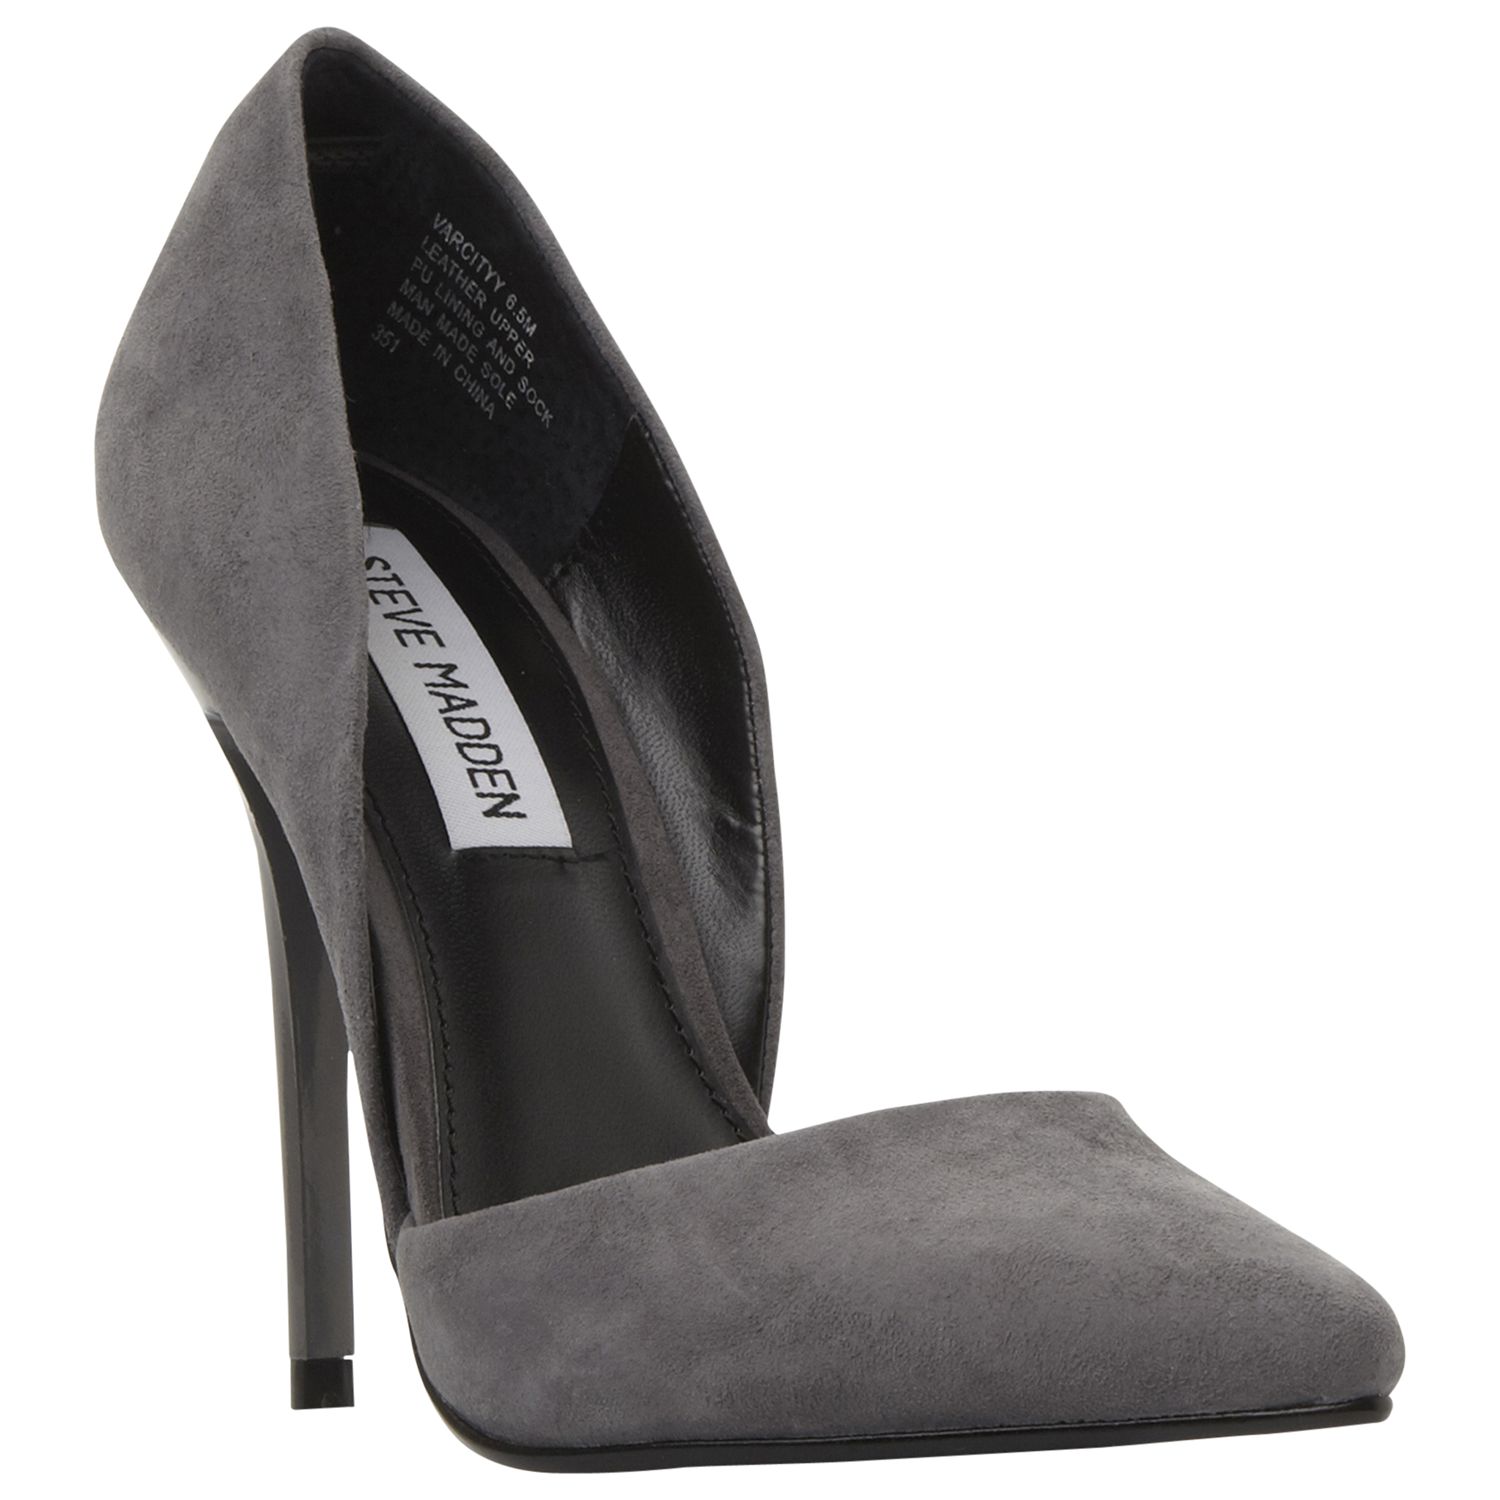 Steve Madden Varcityy Cut Out Upper Court Shoes , Grey Suede